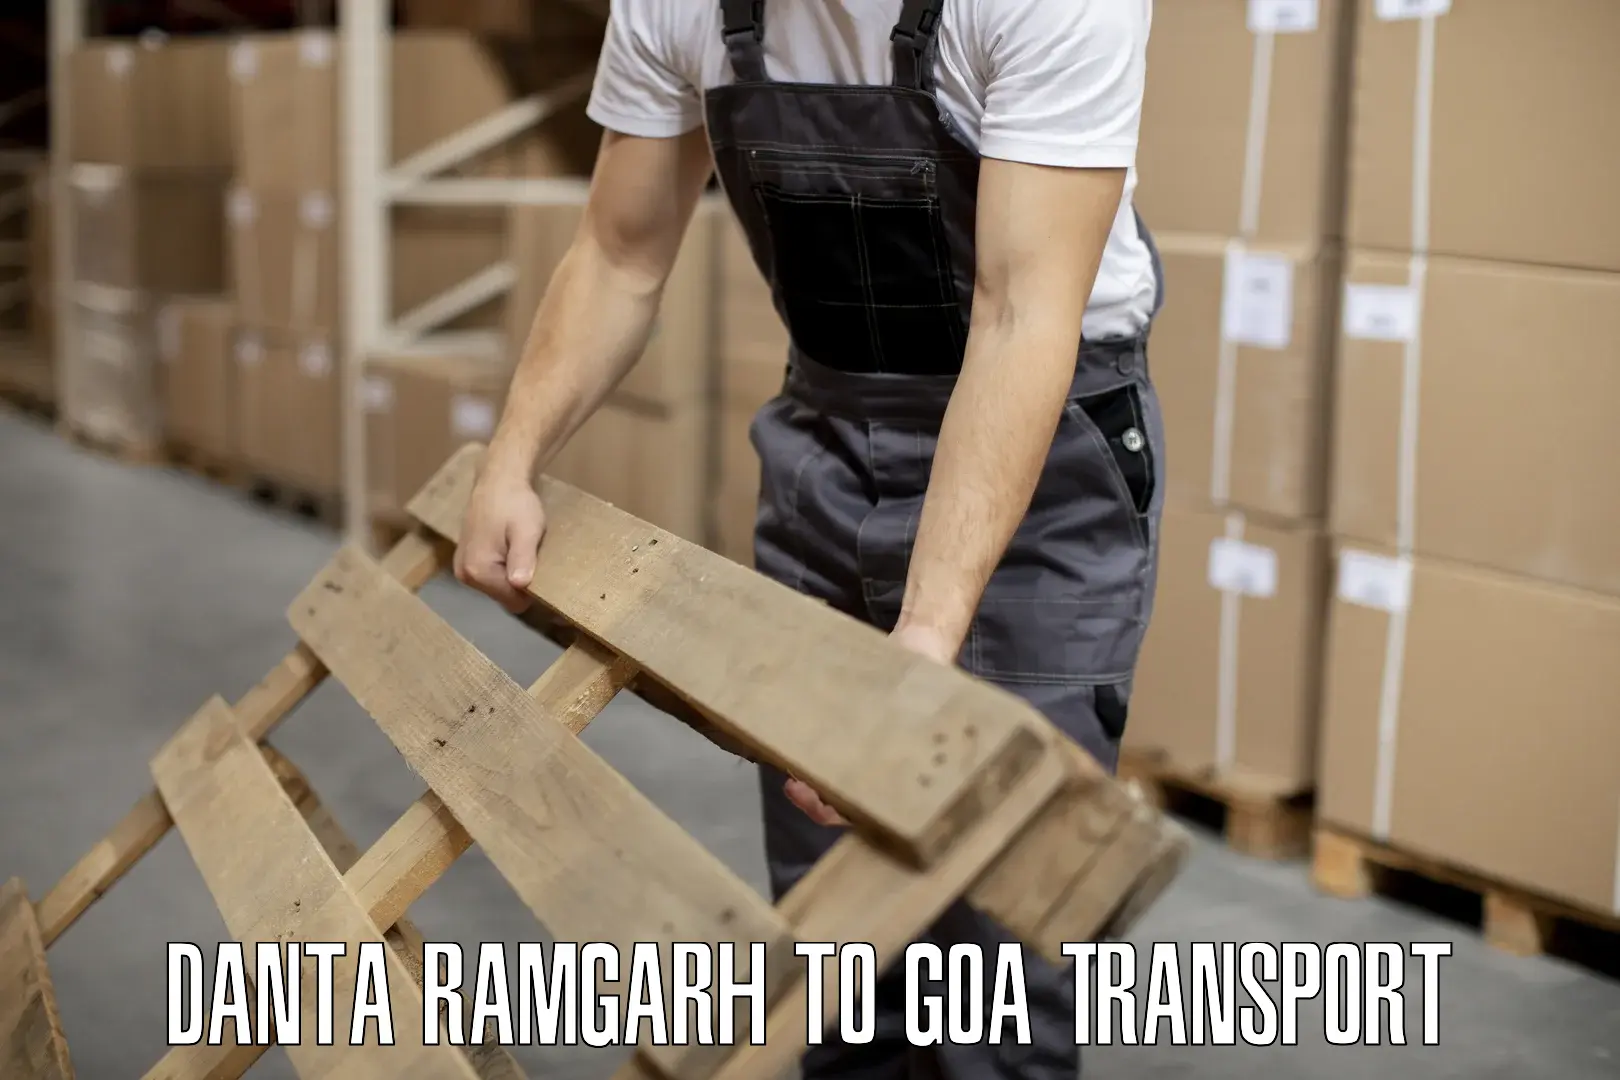 Road transport online services Danta Ramgarh to Goa